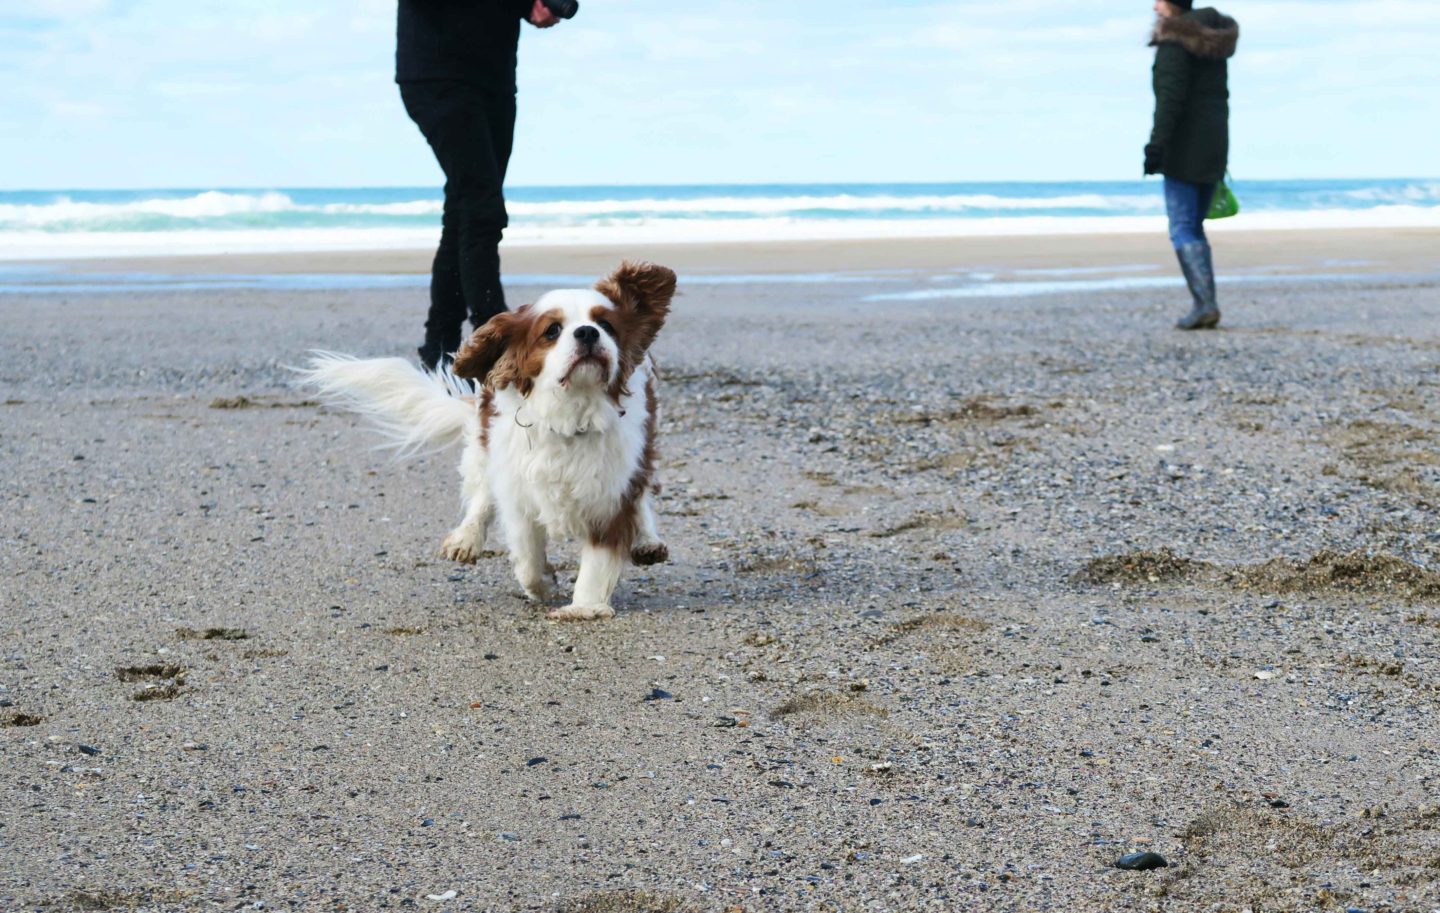 holywell bay dog running on beach with people